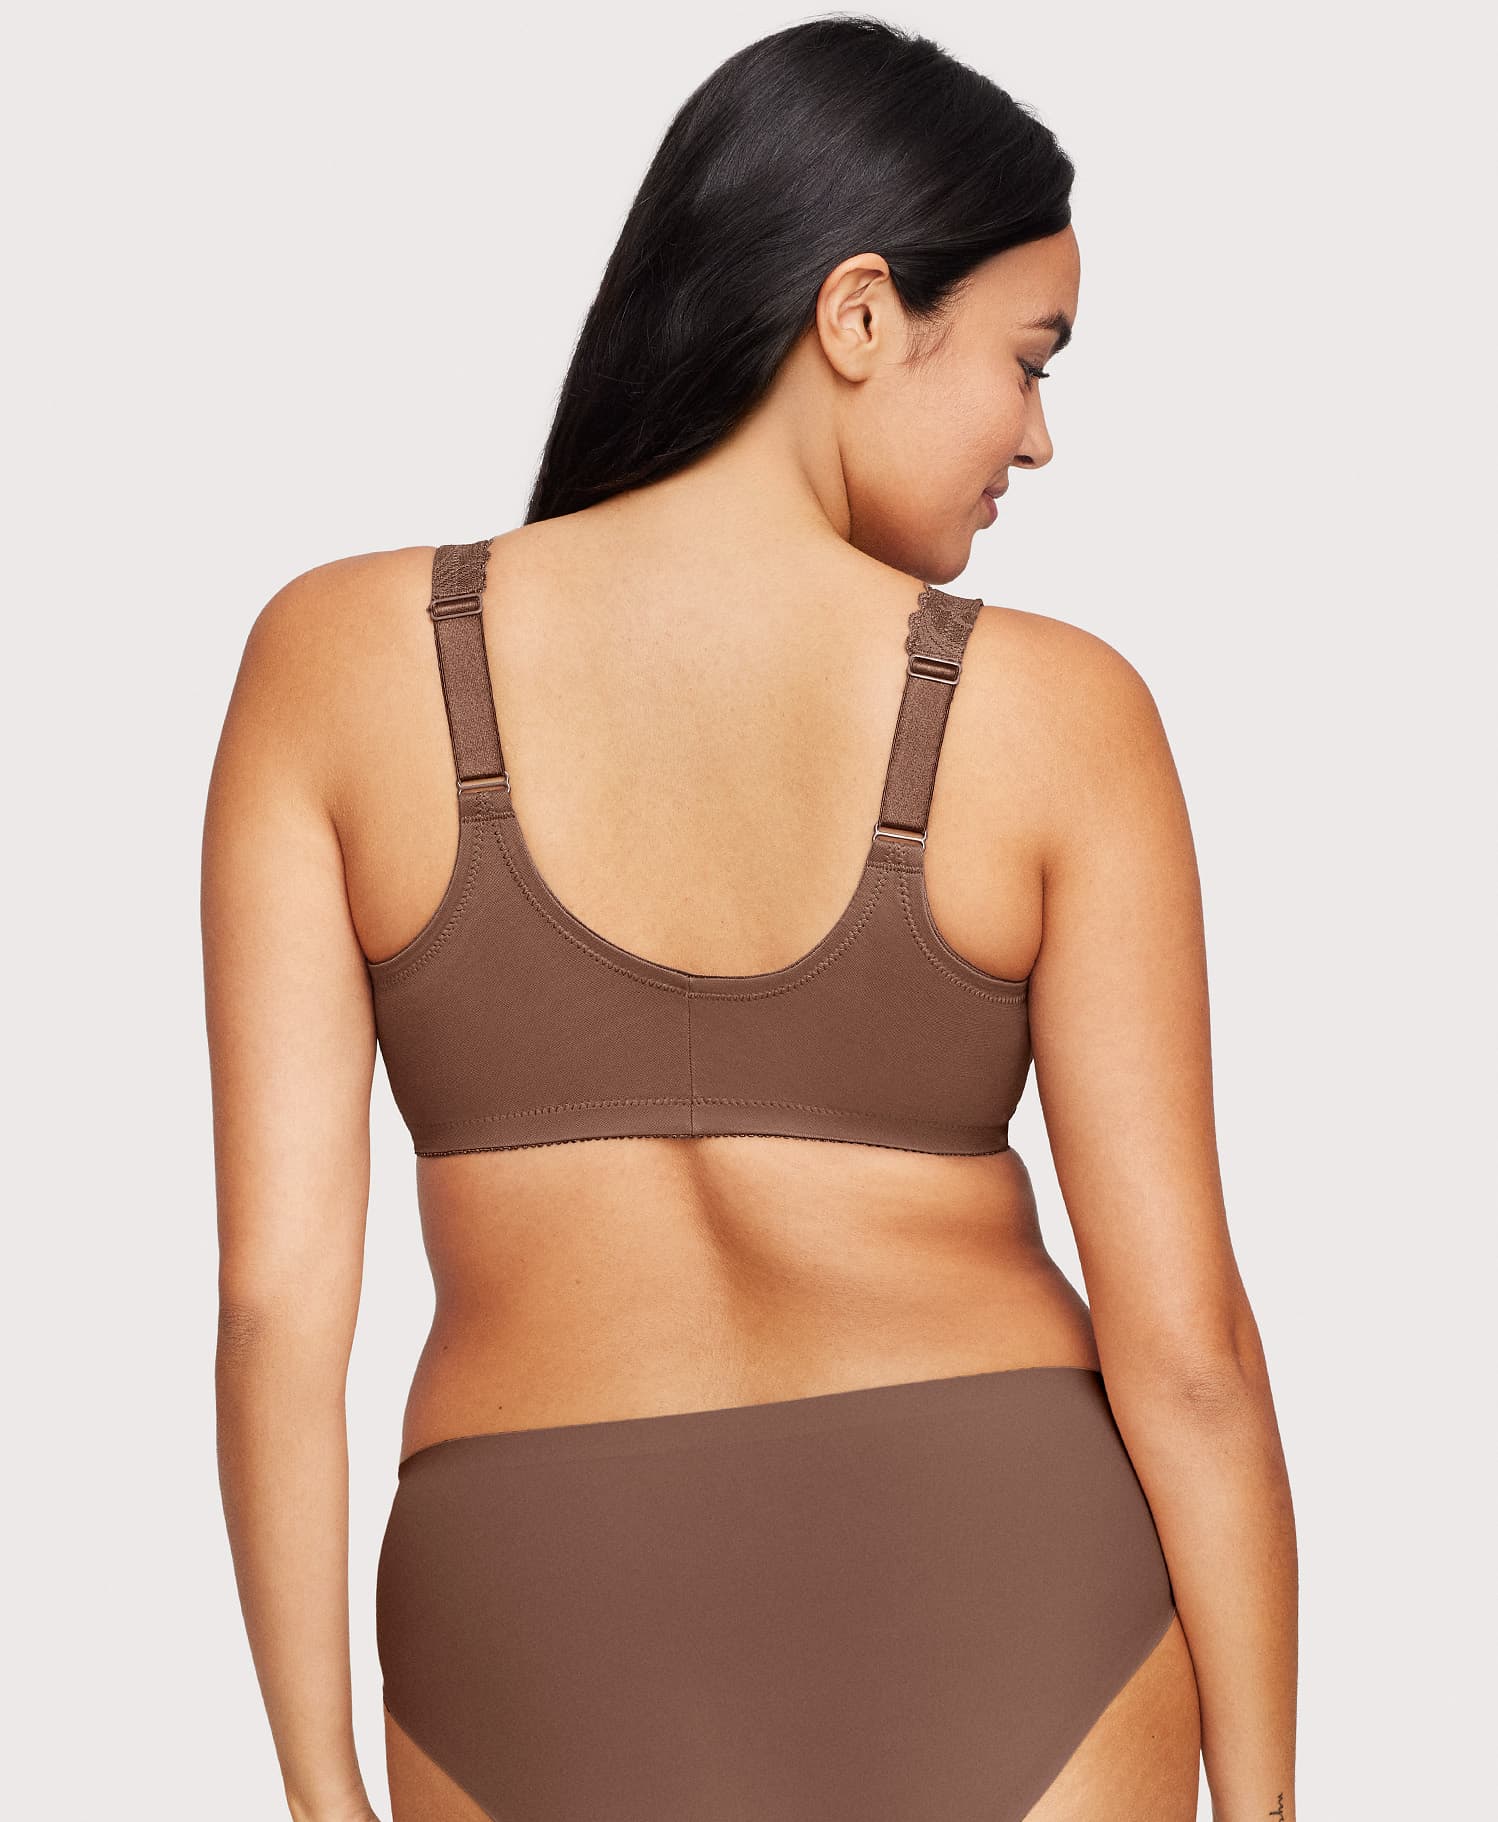 I'm loving this new Essentials Smoothing Comfort Wireless Bra! The